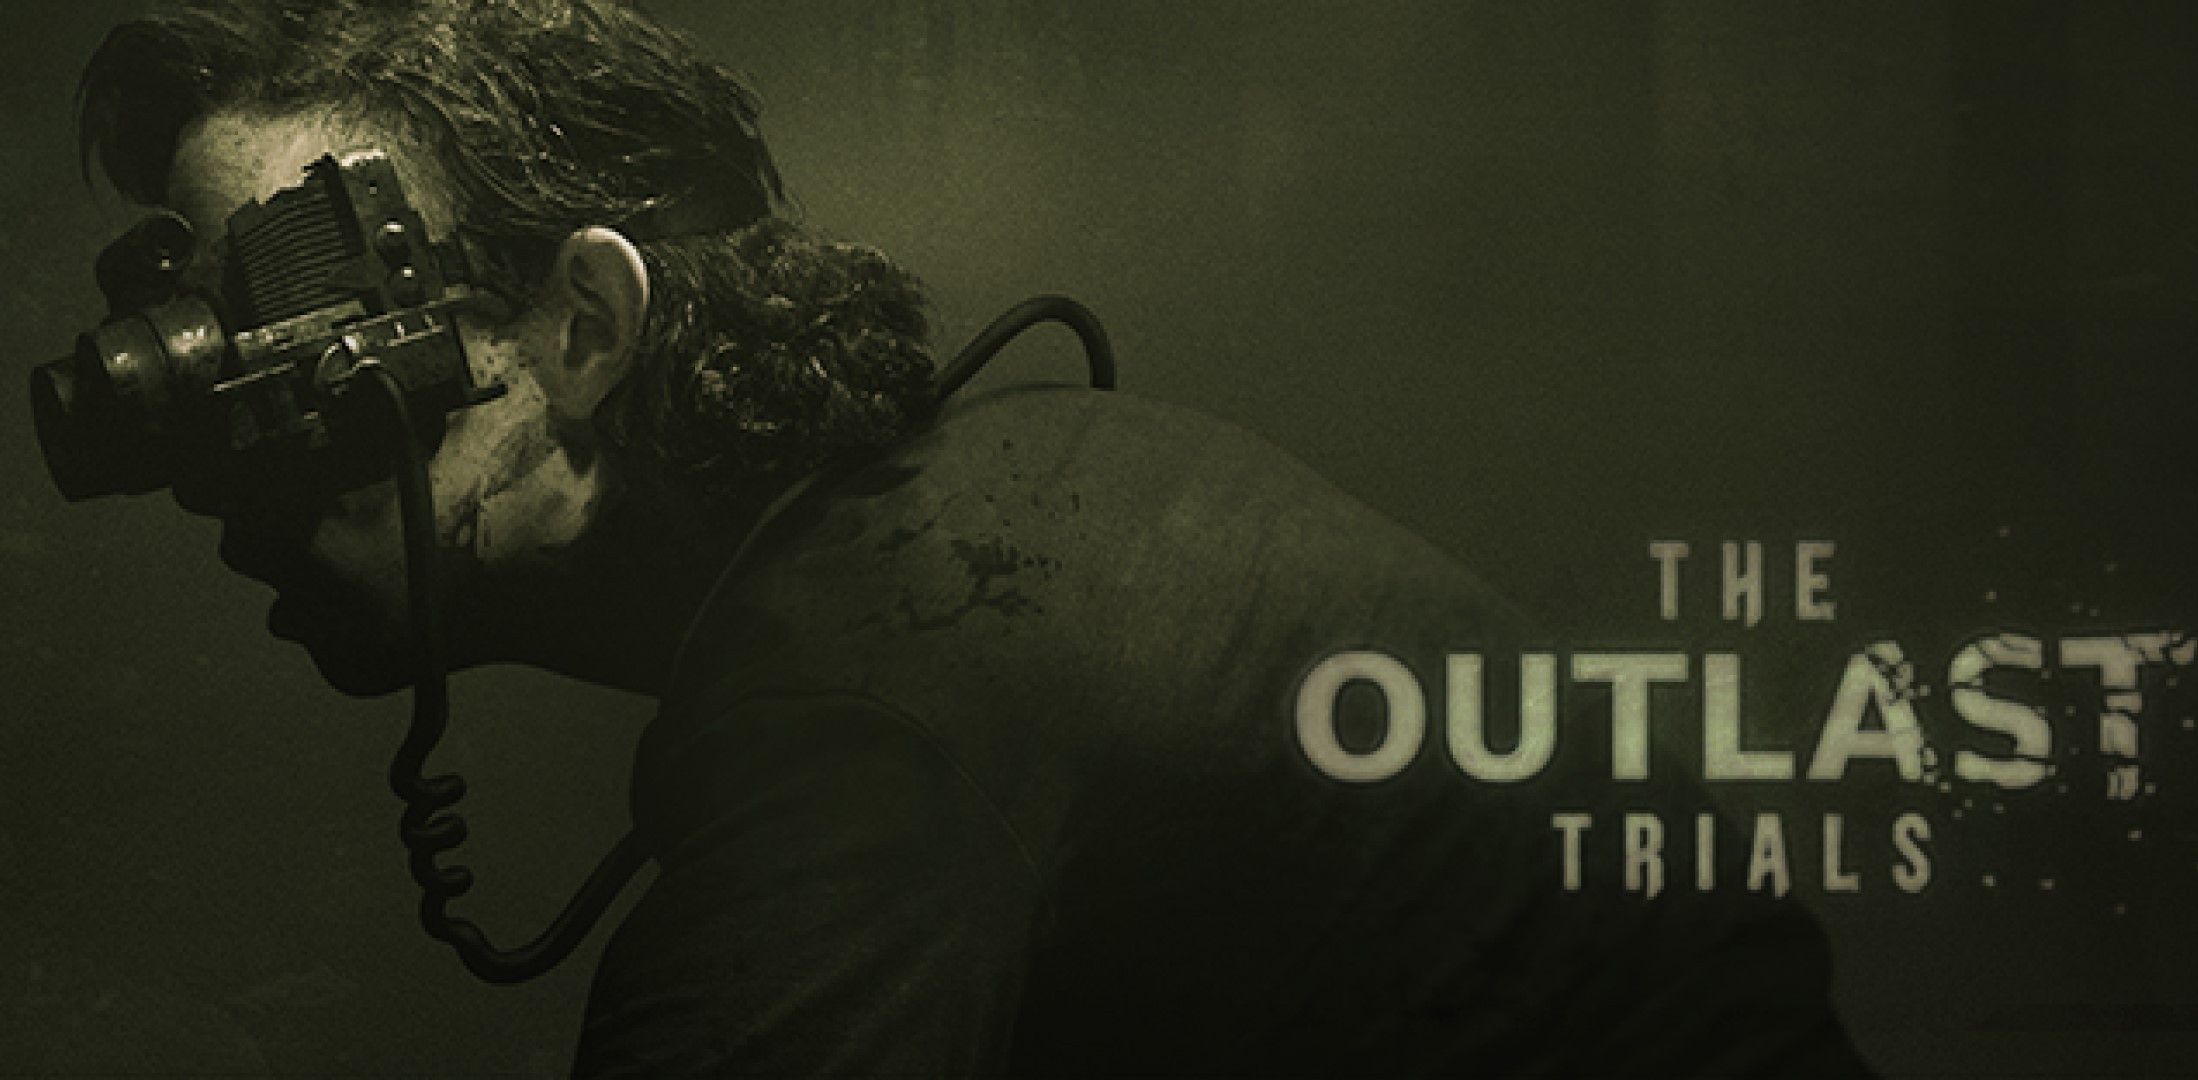 The Outlast Trials Is A Multiplayer Cold War Outlast Game - DREAD XP